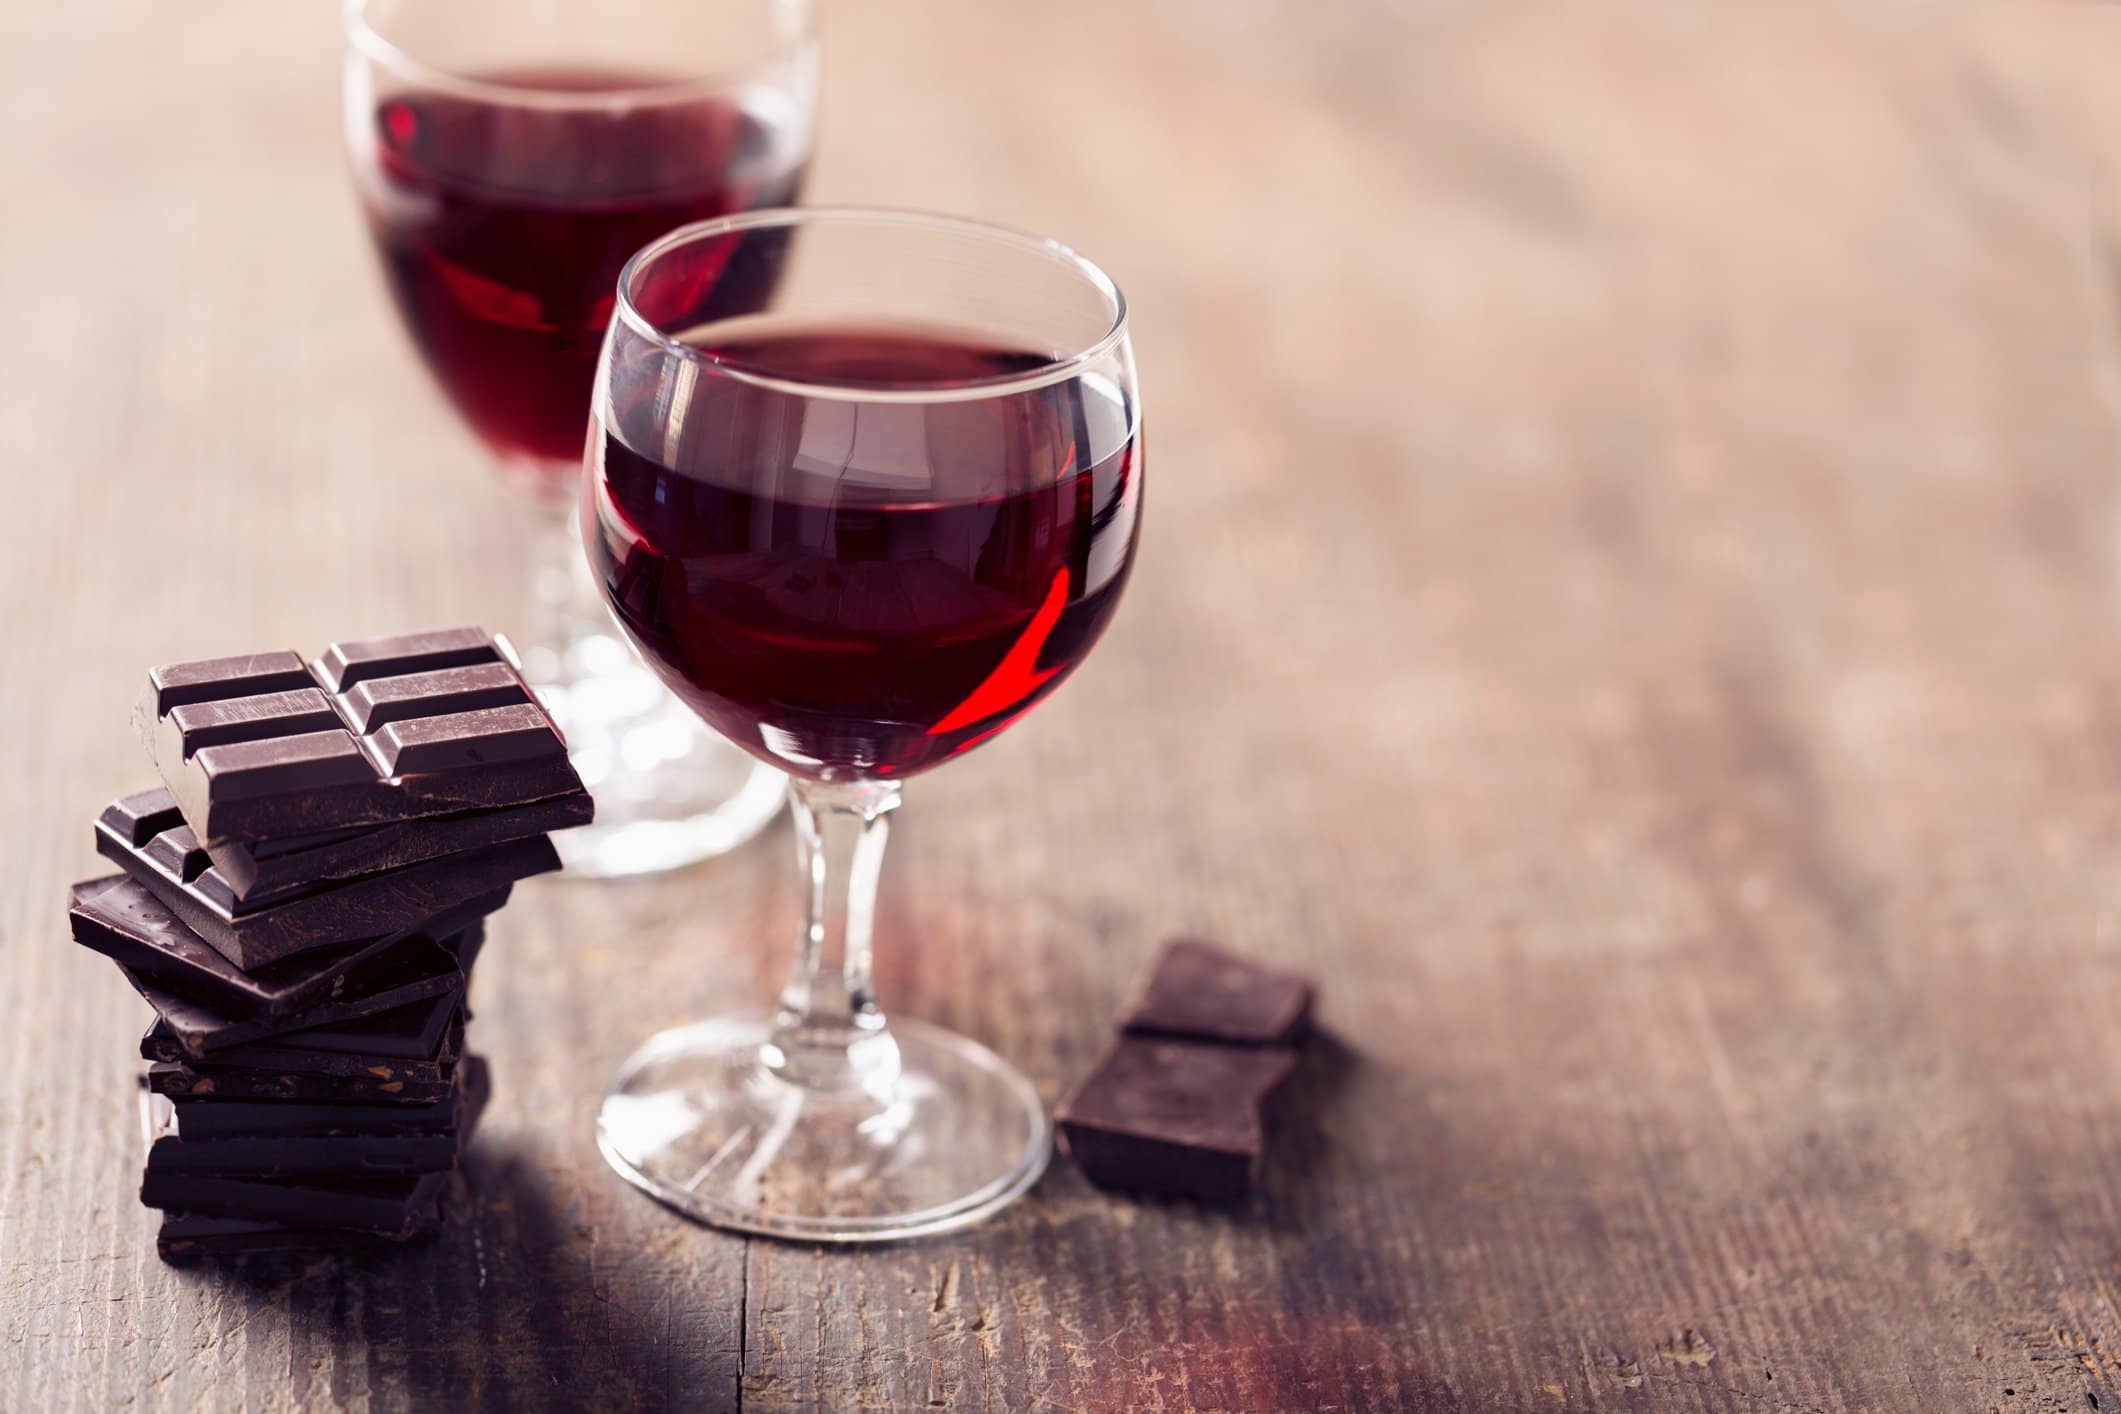 anti aging compound in dark chocolate and red wine